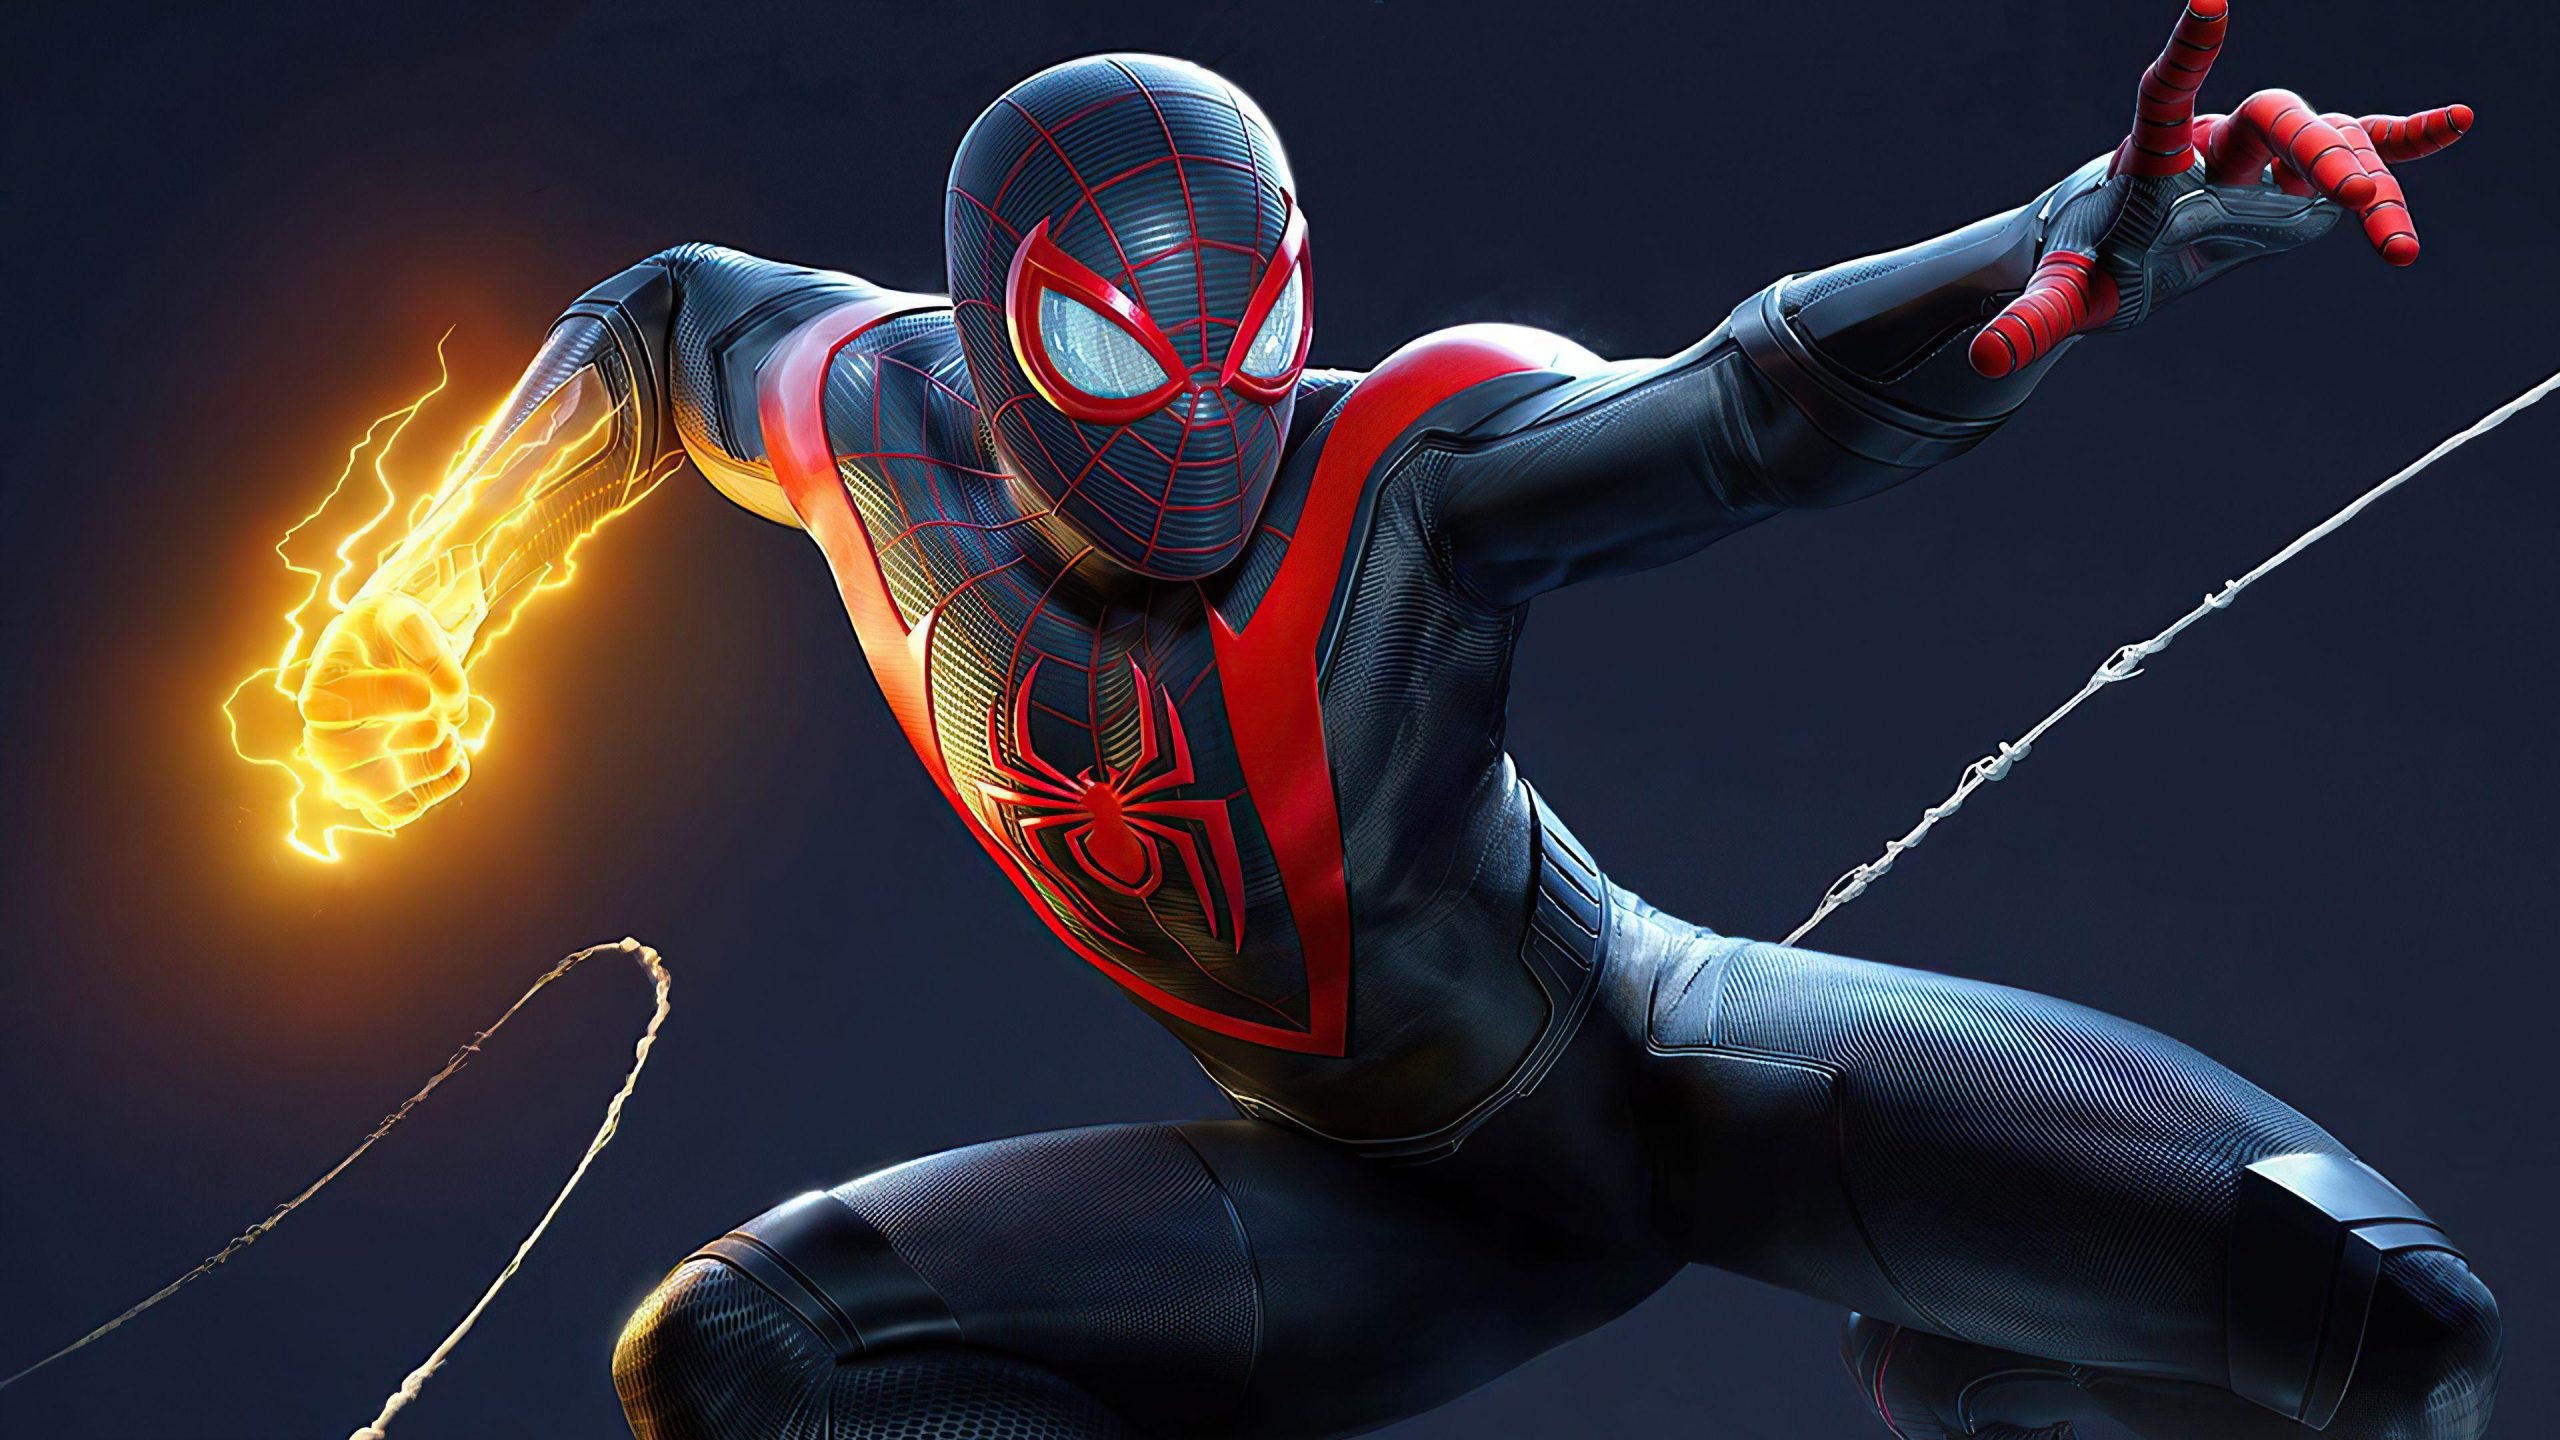 Spider-Man And Miles Morales cool wallpaper, Spider-Man And Miles Morales, Movies